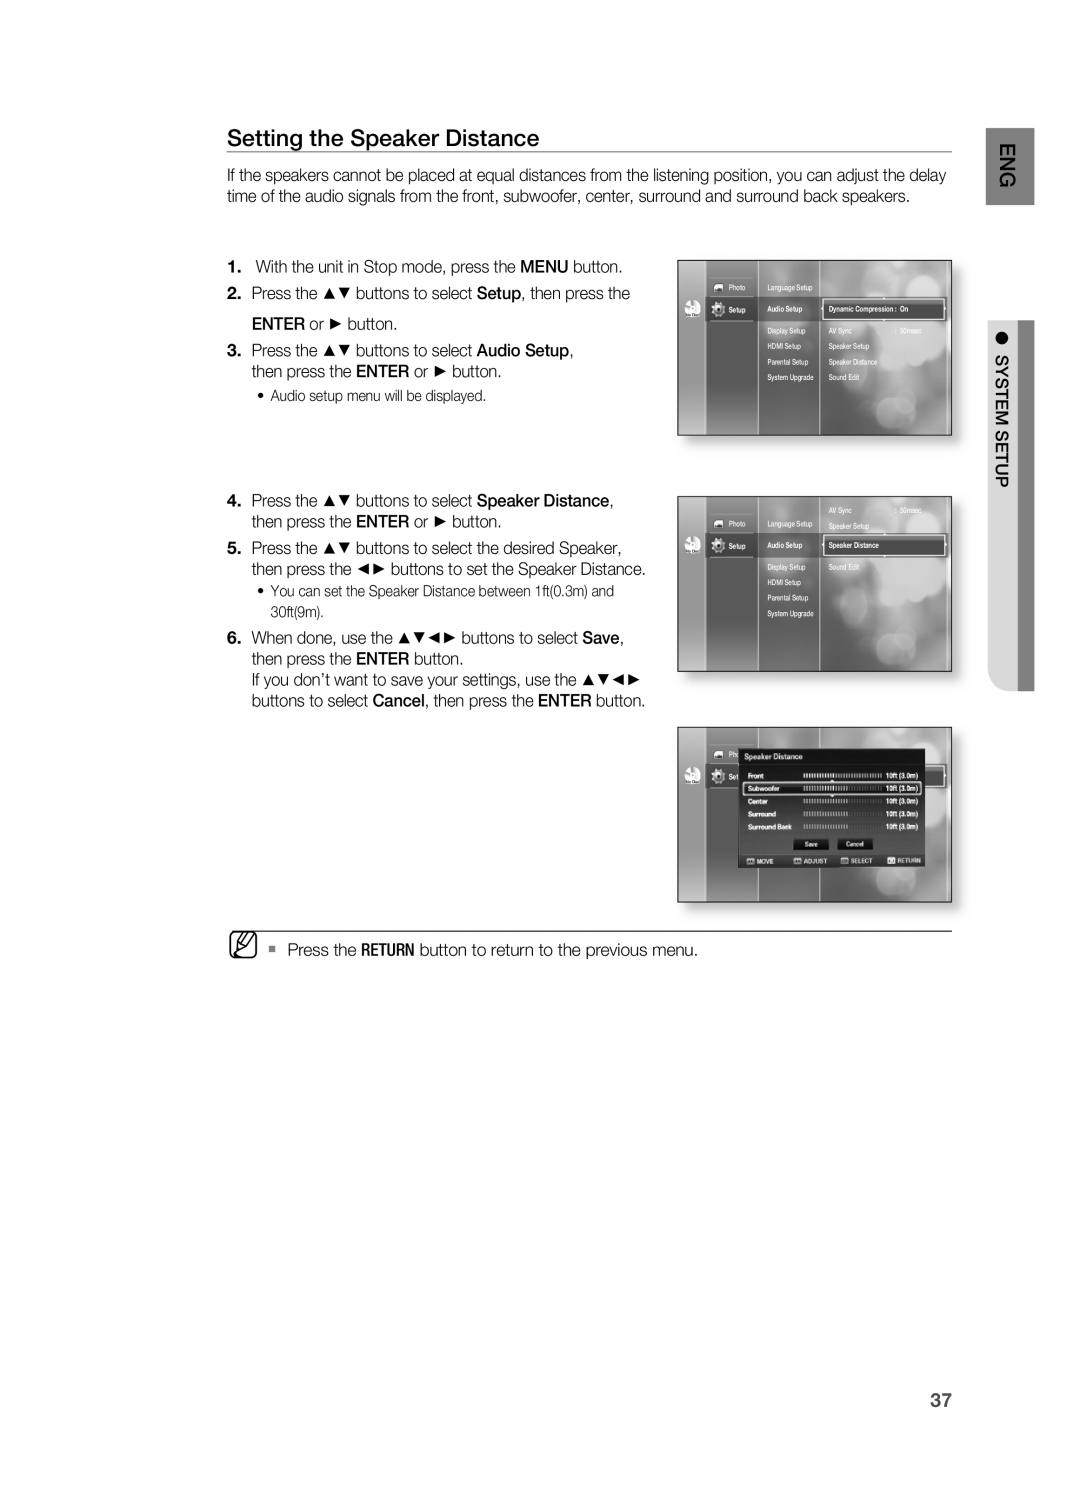 Samsung HT-BD2 manual Setting the Speaker Distance, ENTER or + button, Press the $% buttons to select Audio Setup 